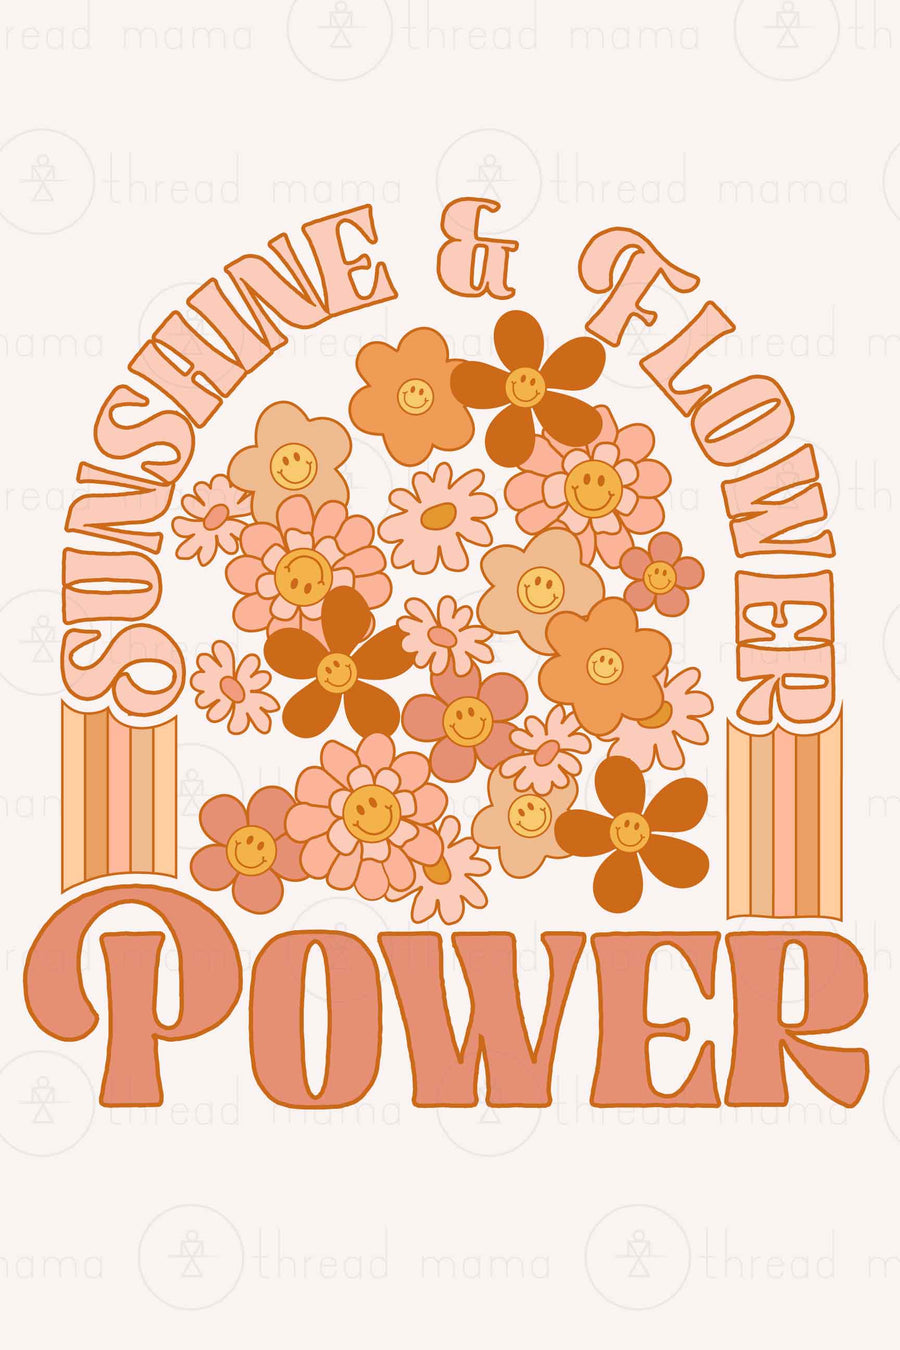 Sunshine Flower Power Collection (Printable Poster)